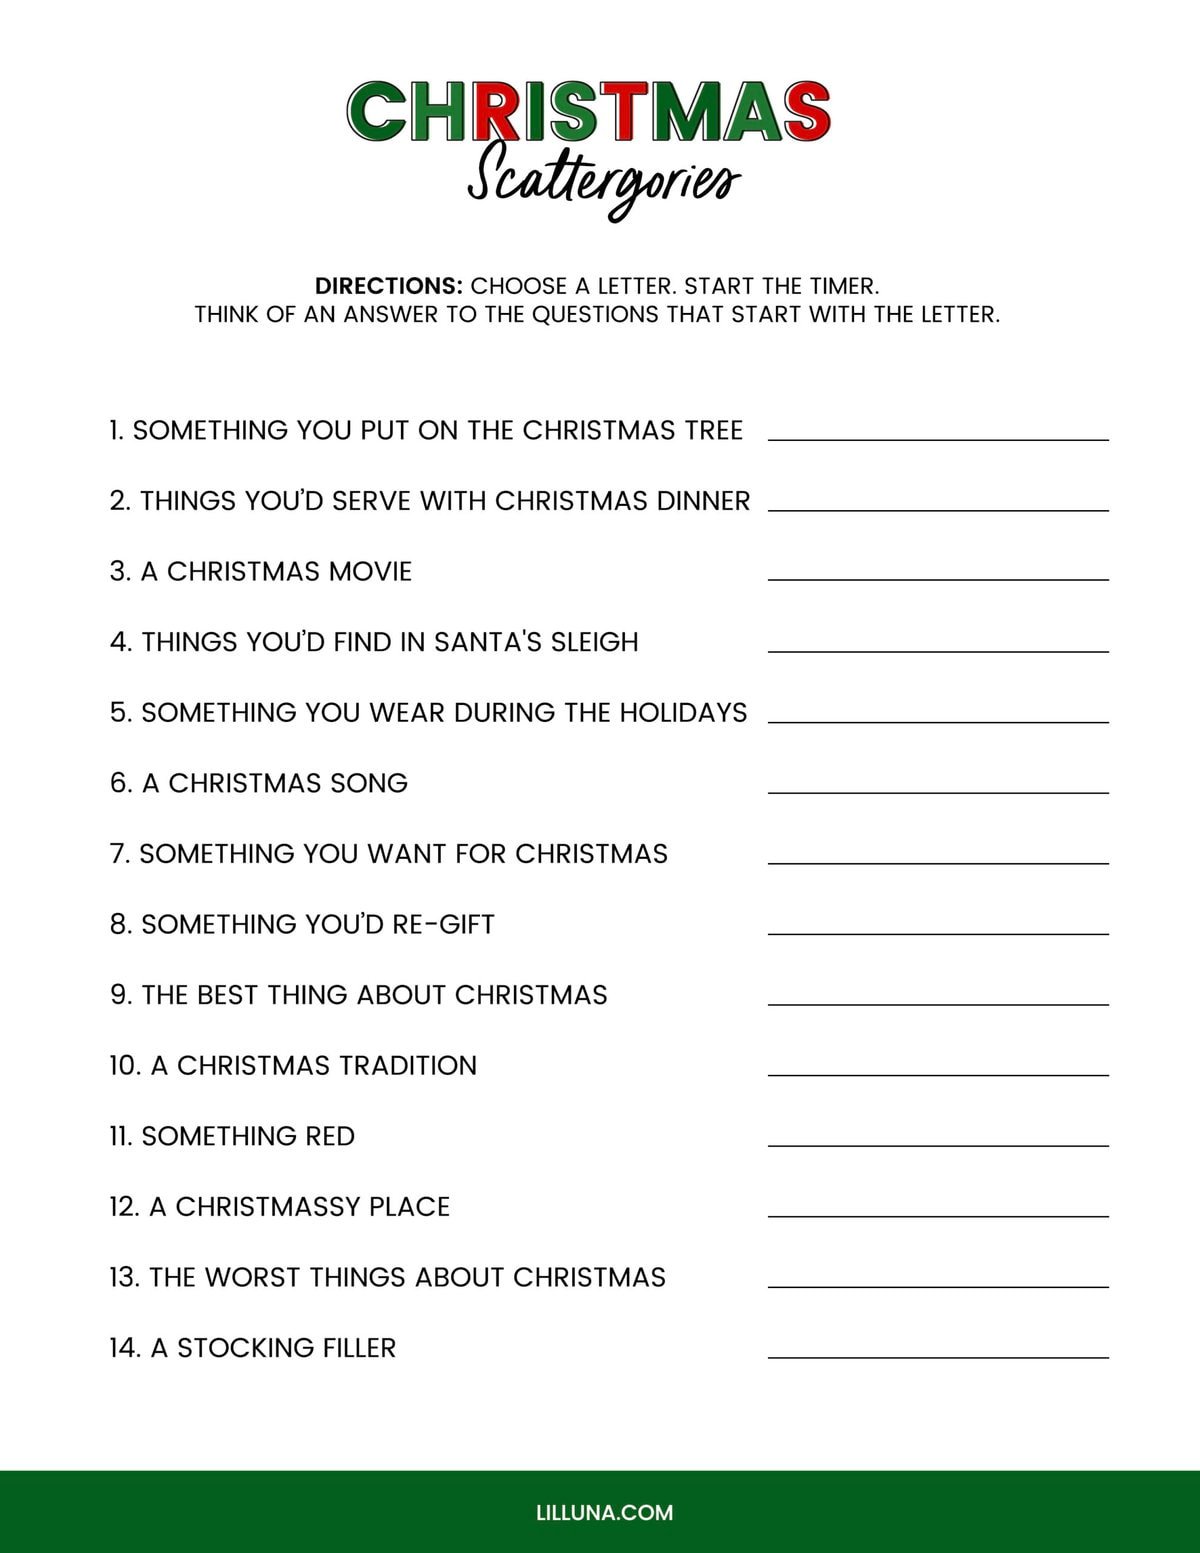 A picture of Christmas scattegories free printable Christmas game.